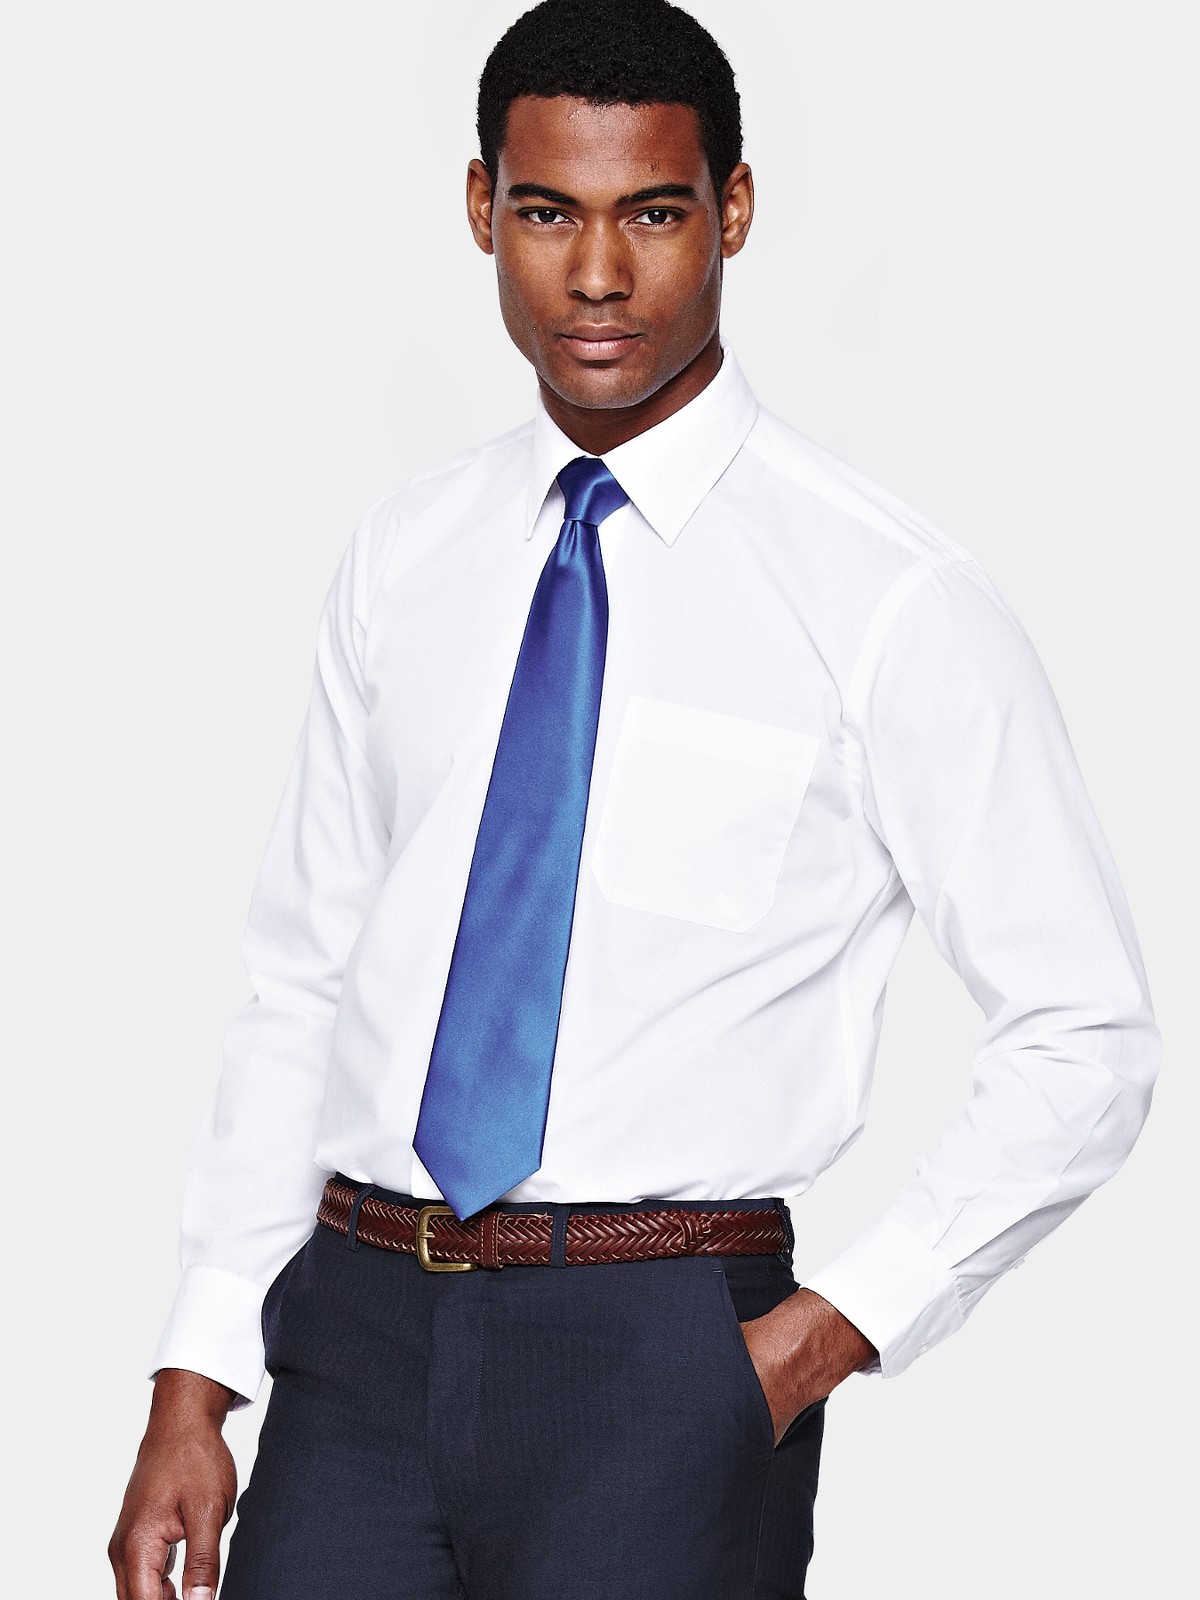 Can you wear any dress shirt with a tie or just a certain type ...